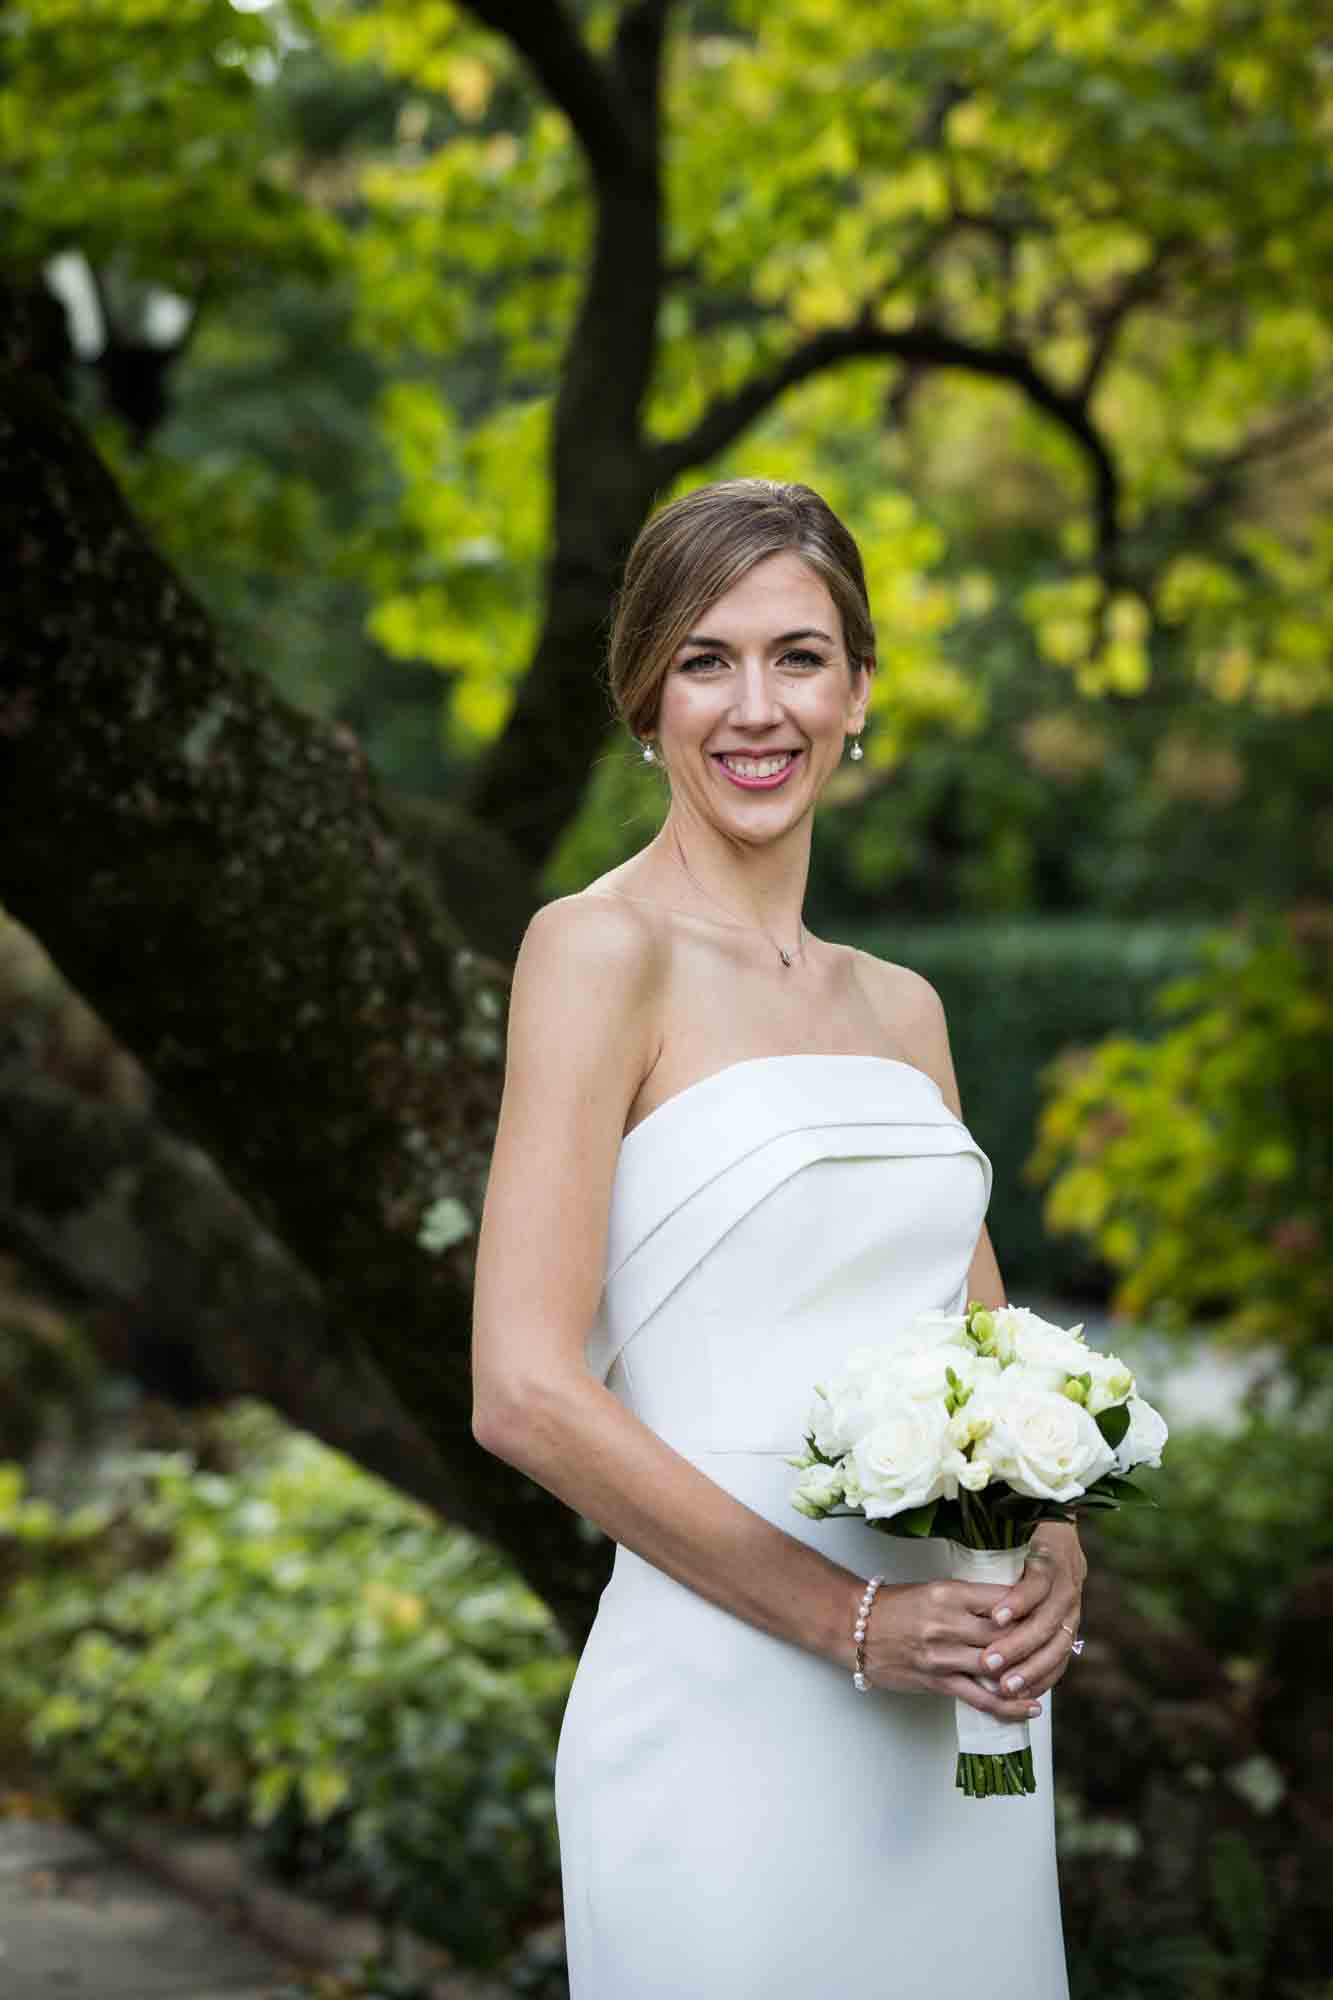 Bride wearing sleeveless wedding dress and holding small bouquet